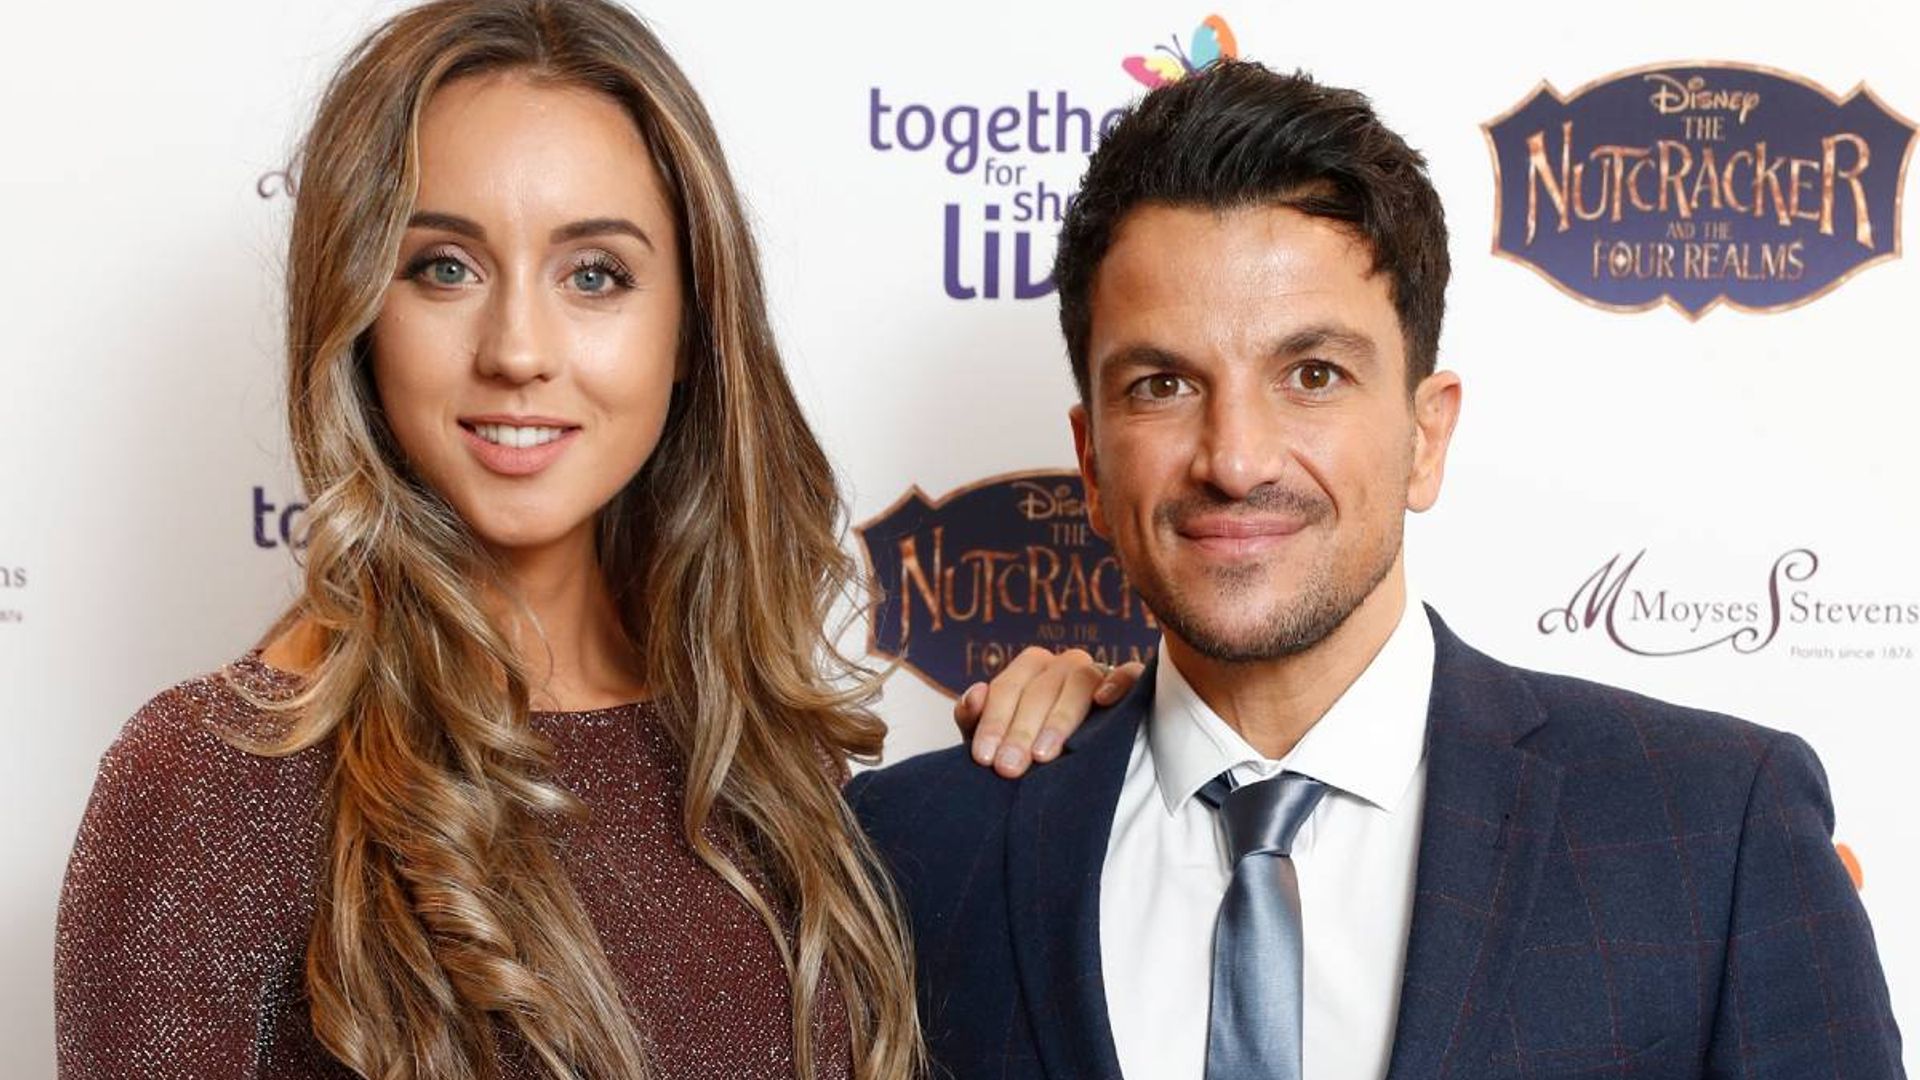 Peter Andre shares candid photos of wife Emily and rarely-seen children after family surprise